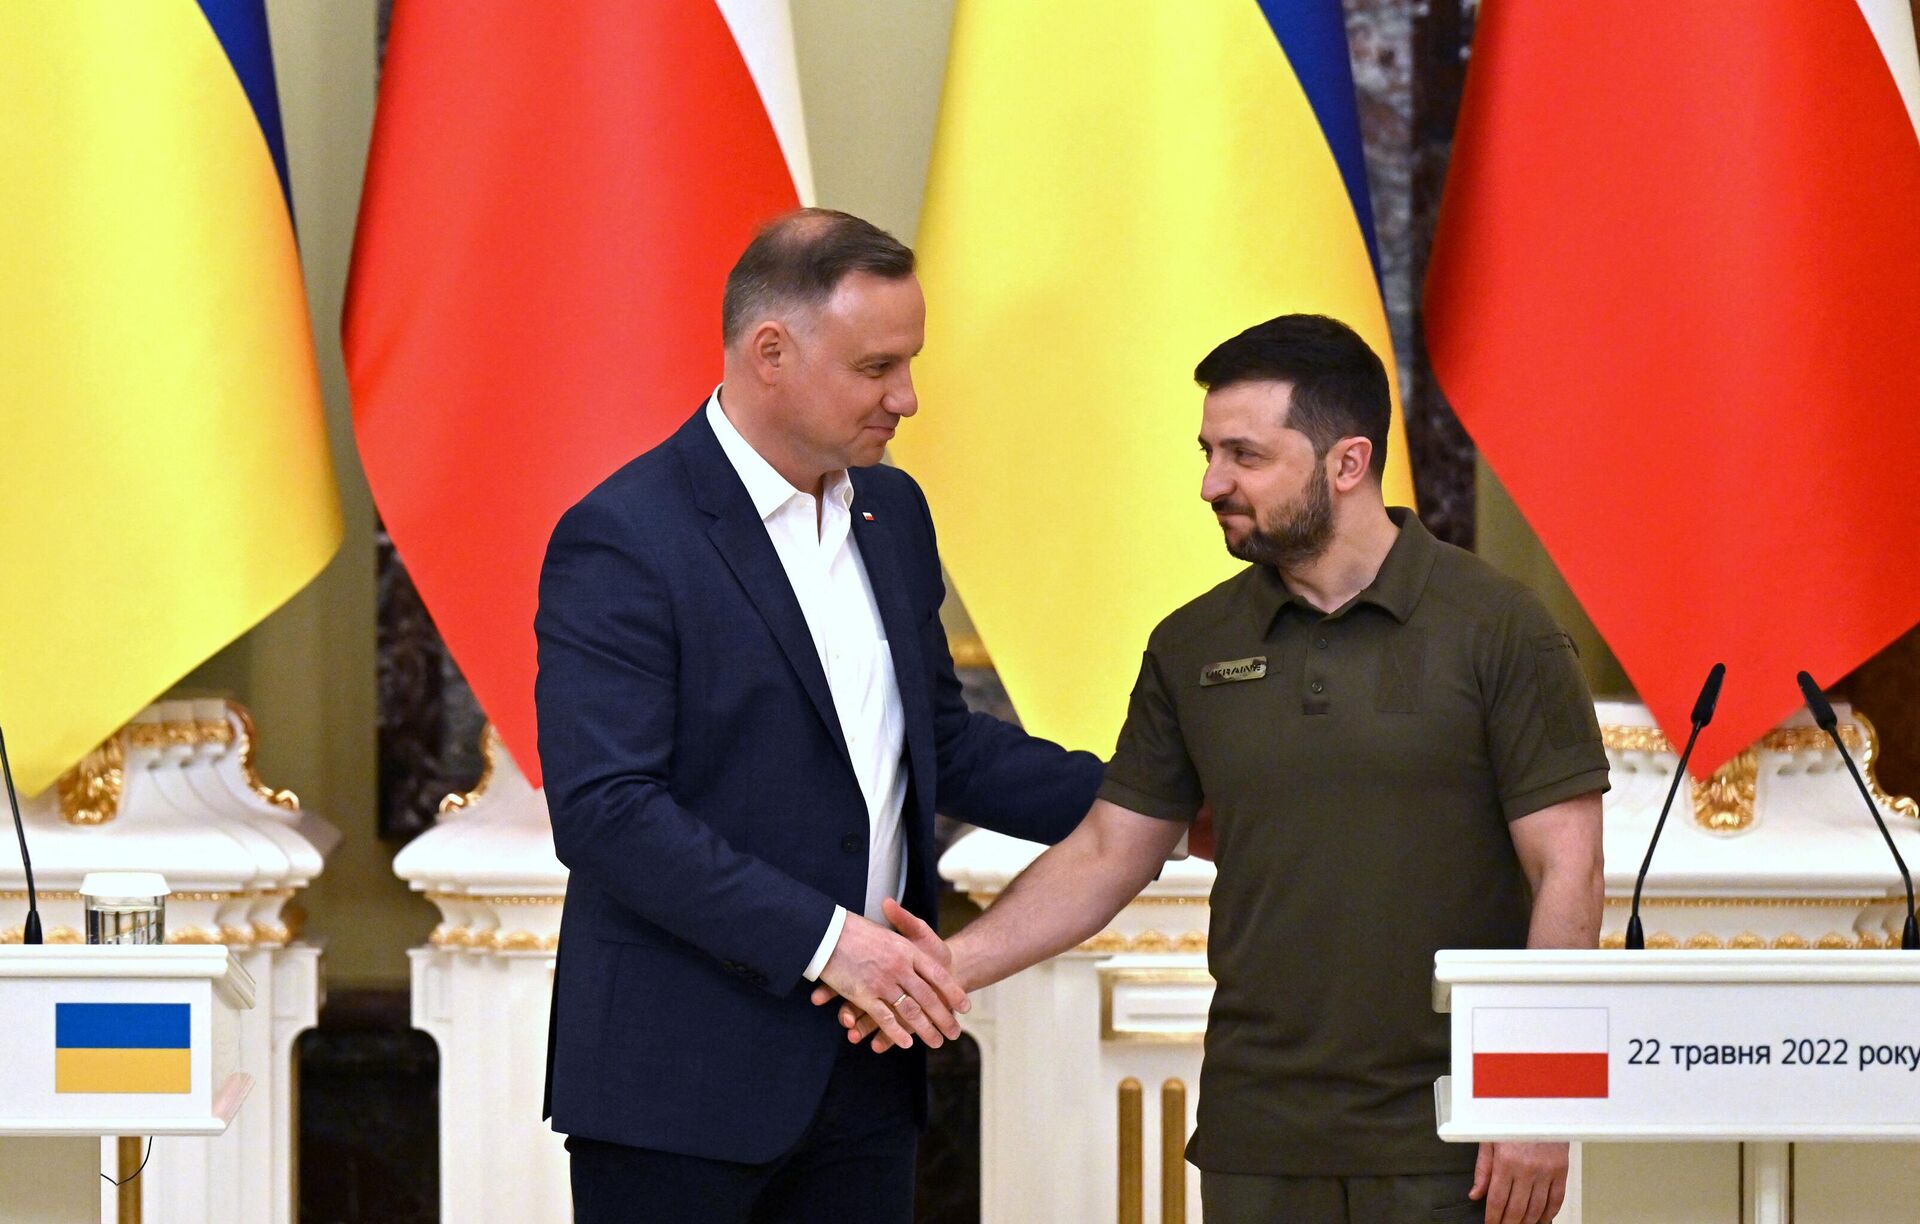 Ukrainian President Volodymyr Zelensky (R) and his Polish counterpart Andrzej Duda shake hands during a press conference following their talks in Kiev on May 22, 2022 - Sputnik International, 1920, 21.01.2023